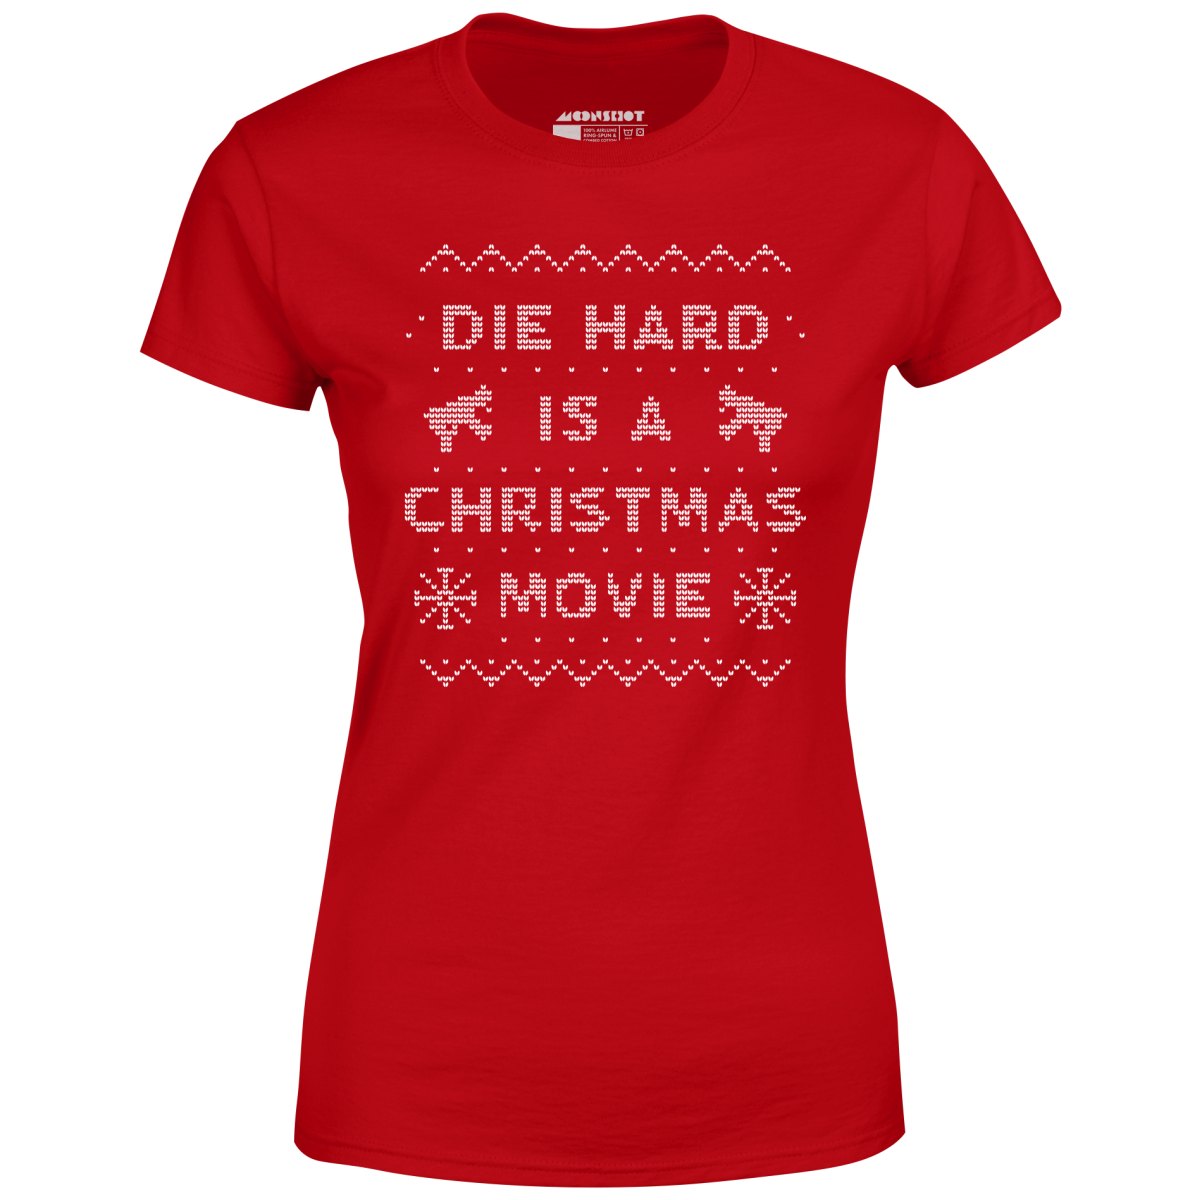 Die Hard is a Christmas Movie - Sweater Print Style - Women's T-Shirt